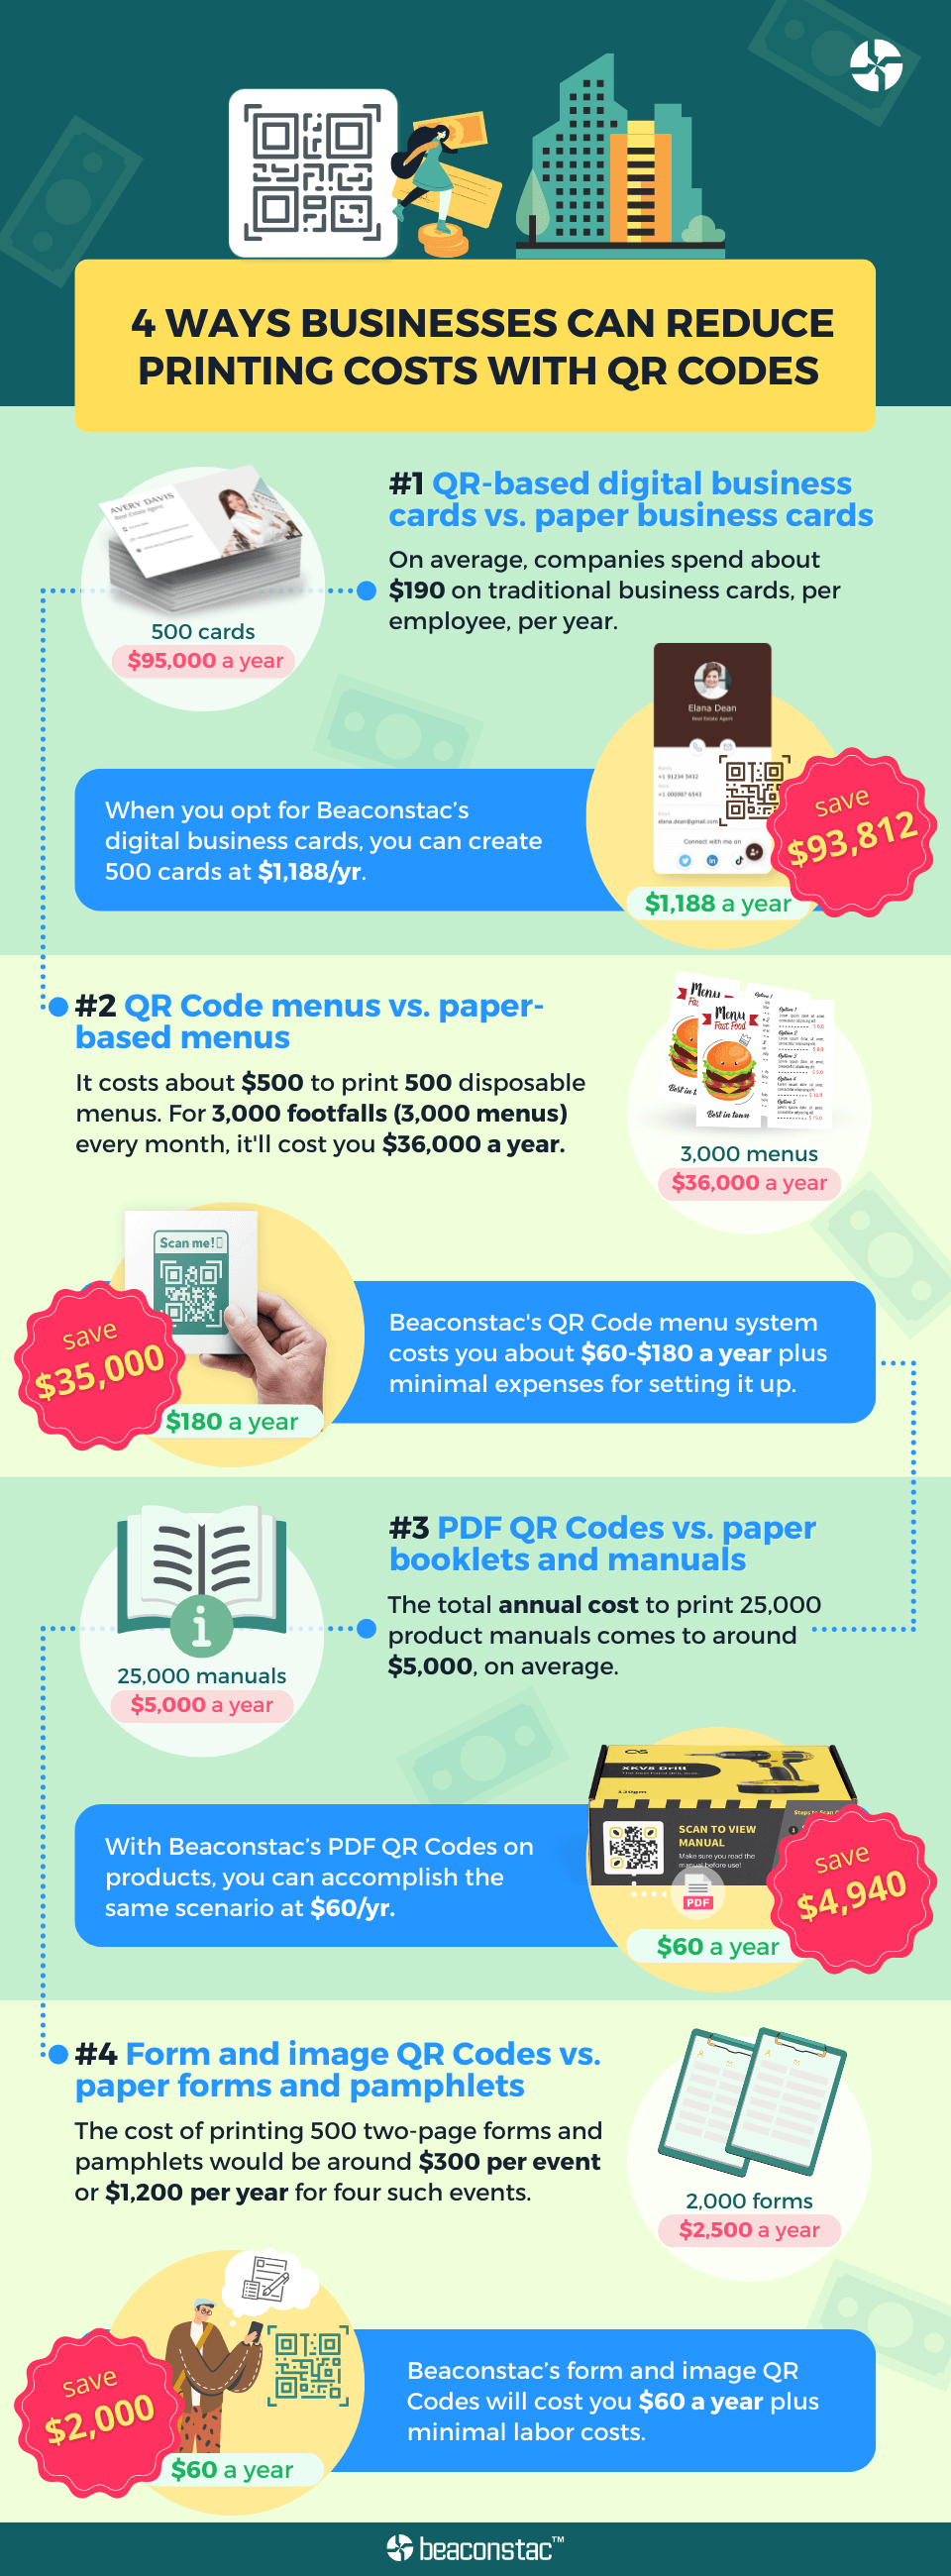 4 ways businesses can reduce printing costs with QR Codes [Infographic] 